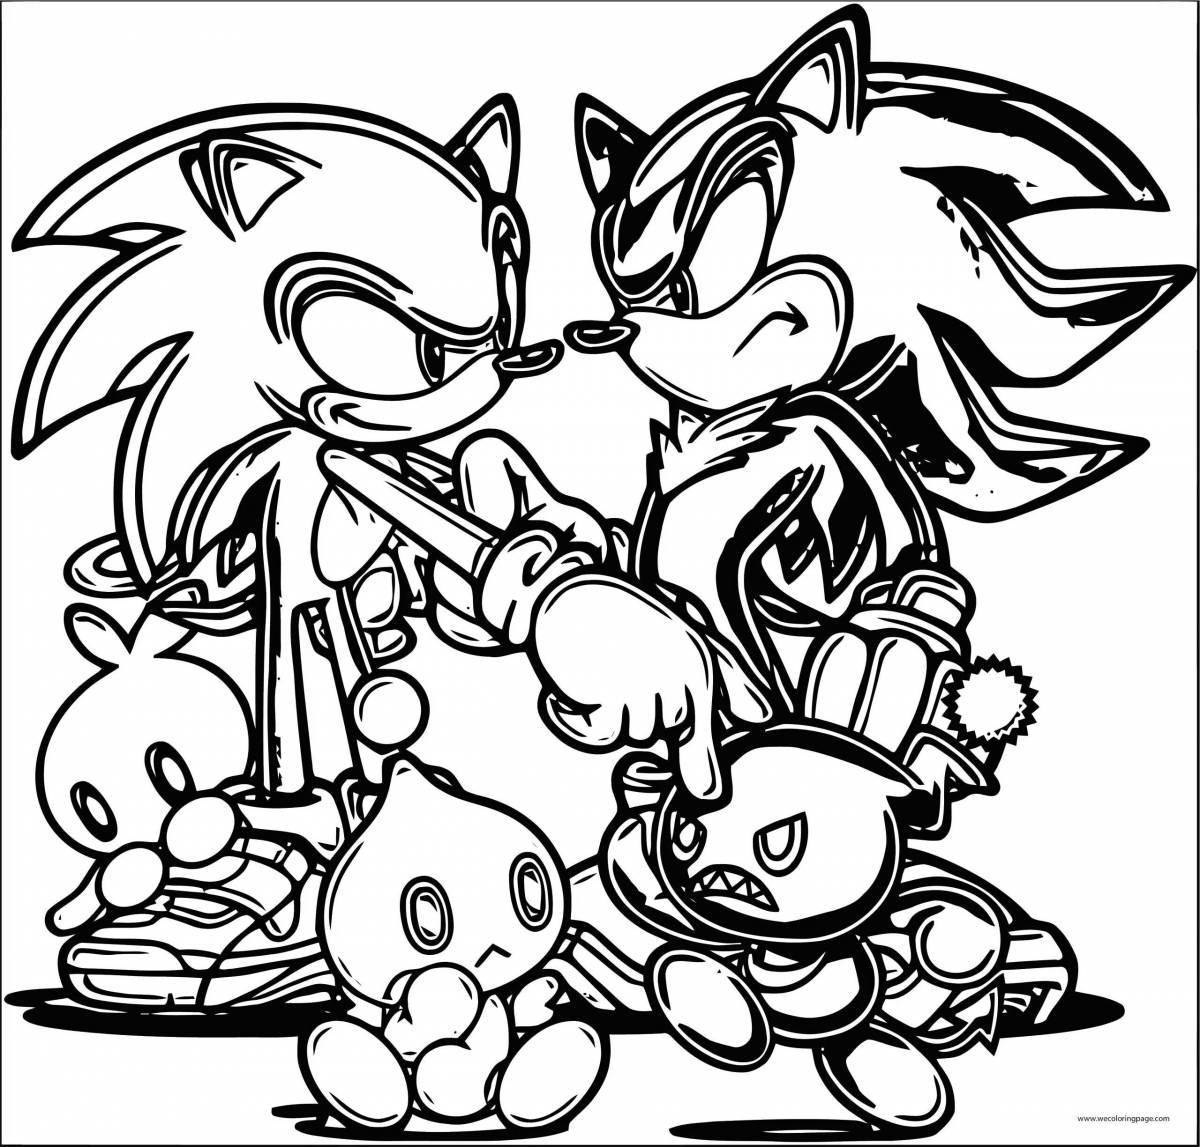 Attractive sonic team coloring